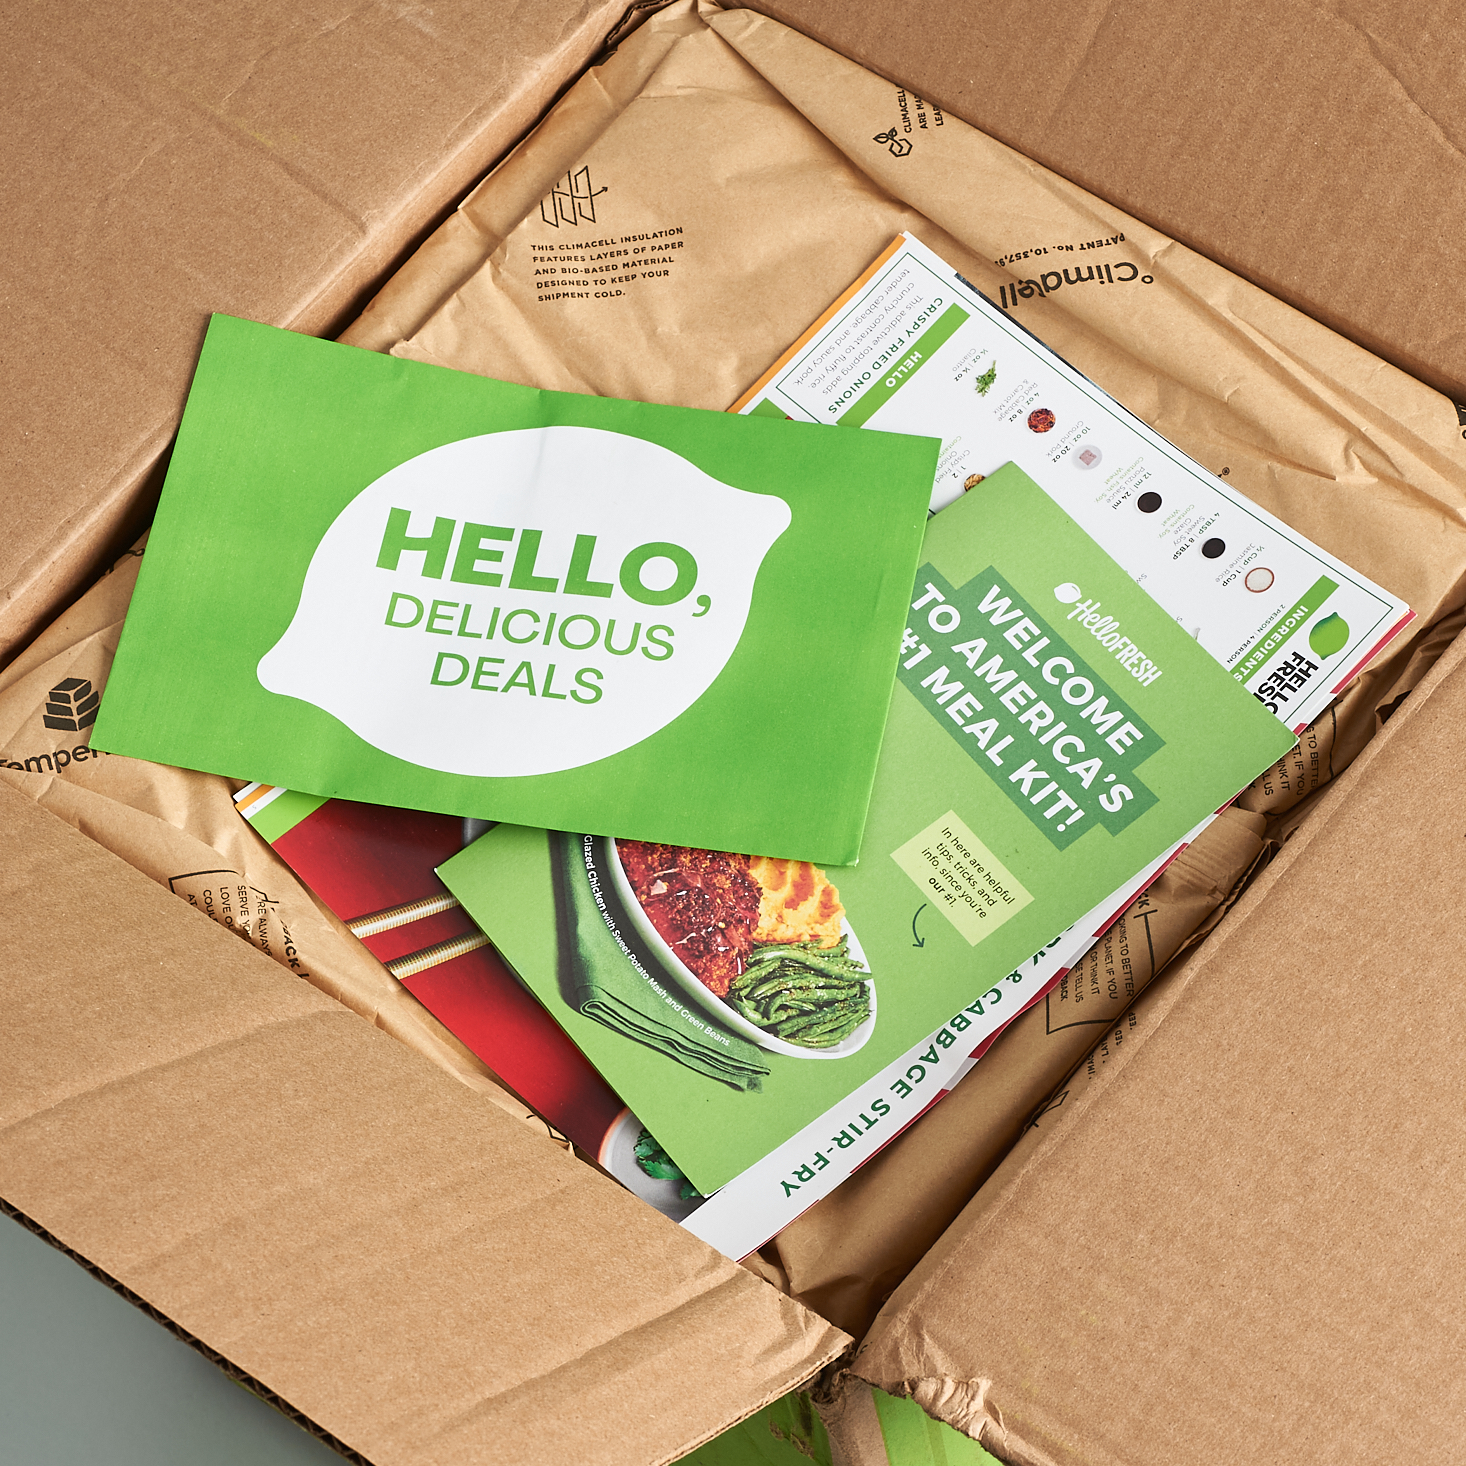 I First Tried HelloFresh 6 Years Ago, This Is Why I’m Still a ...